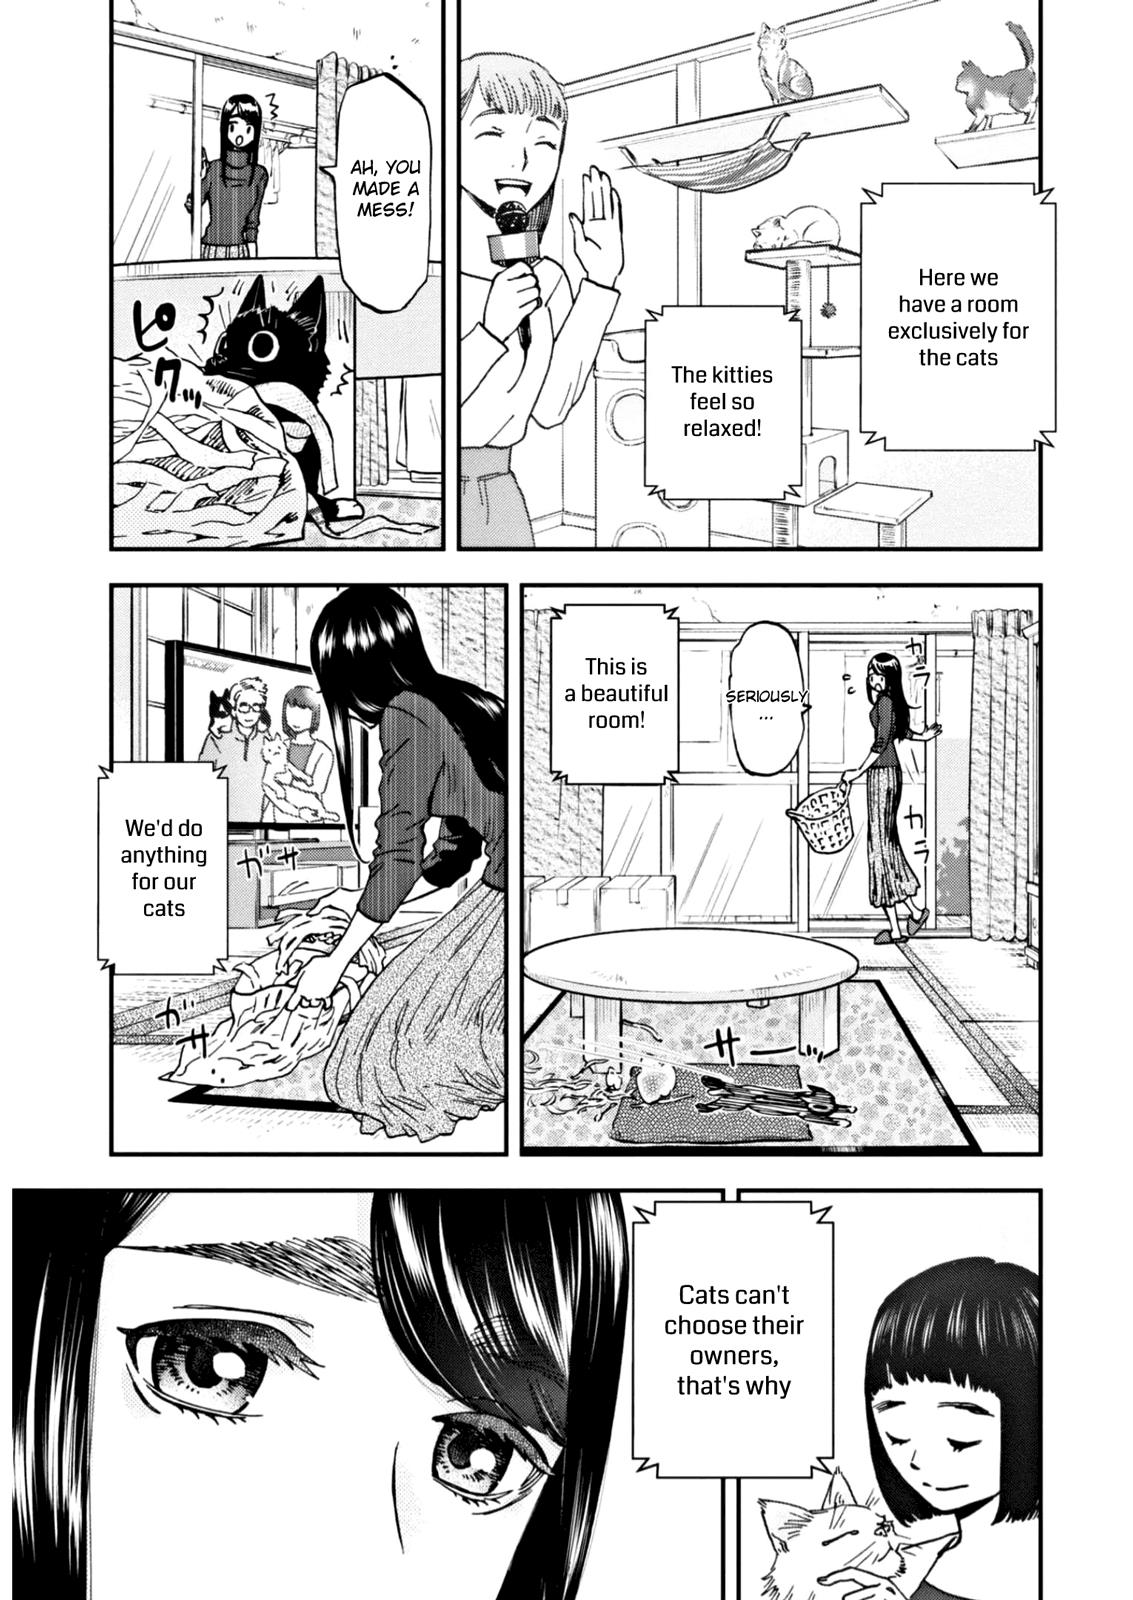 Hosomura-San With Cat's Snack Vol.1 Chapter 4: Eating A Simple Hamburger With A Cat - Picture 3